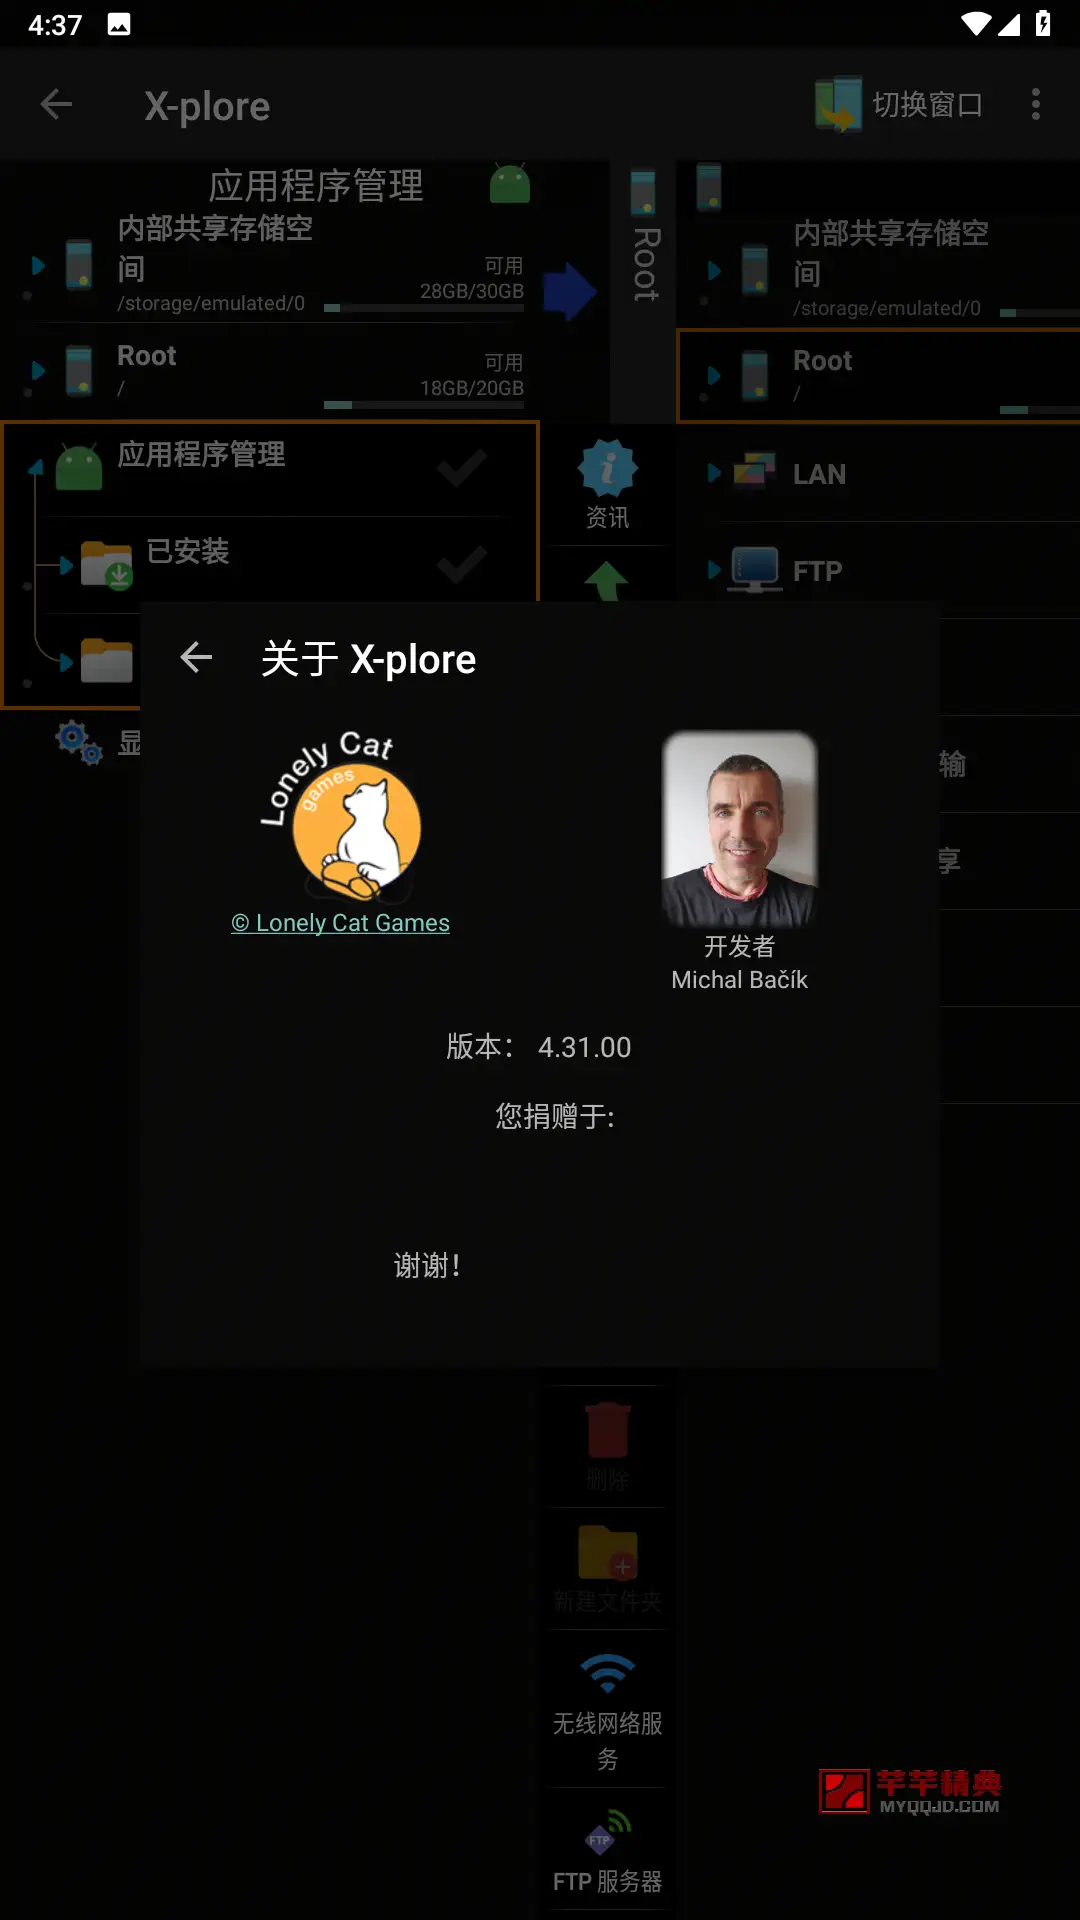 Xplore文件管理器X-plore File Manager v4.35.08 for Android高级版